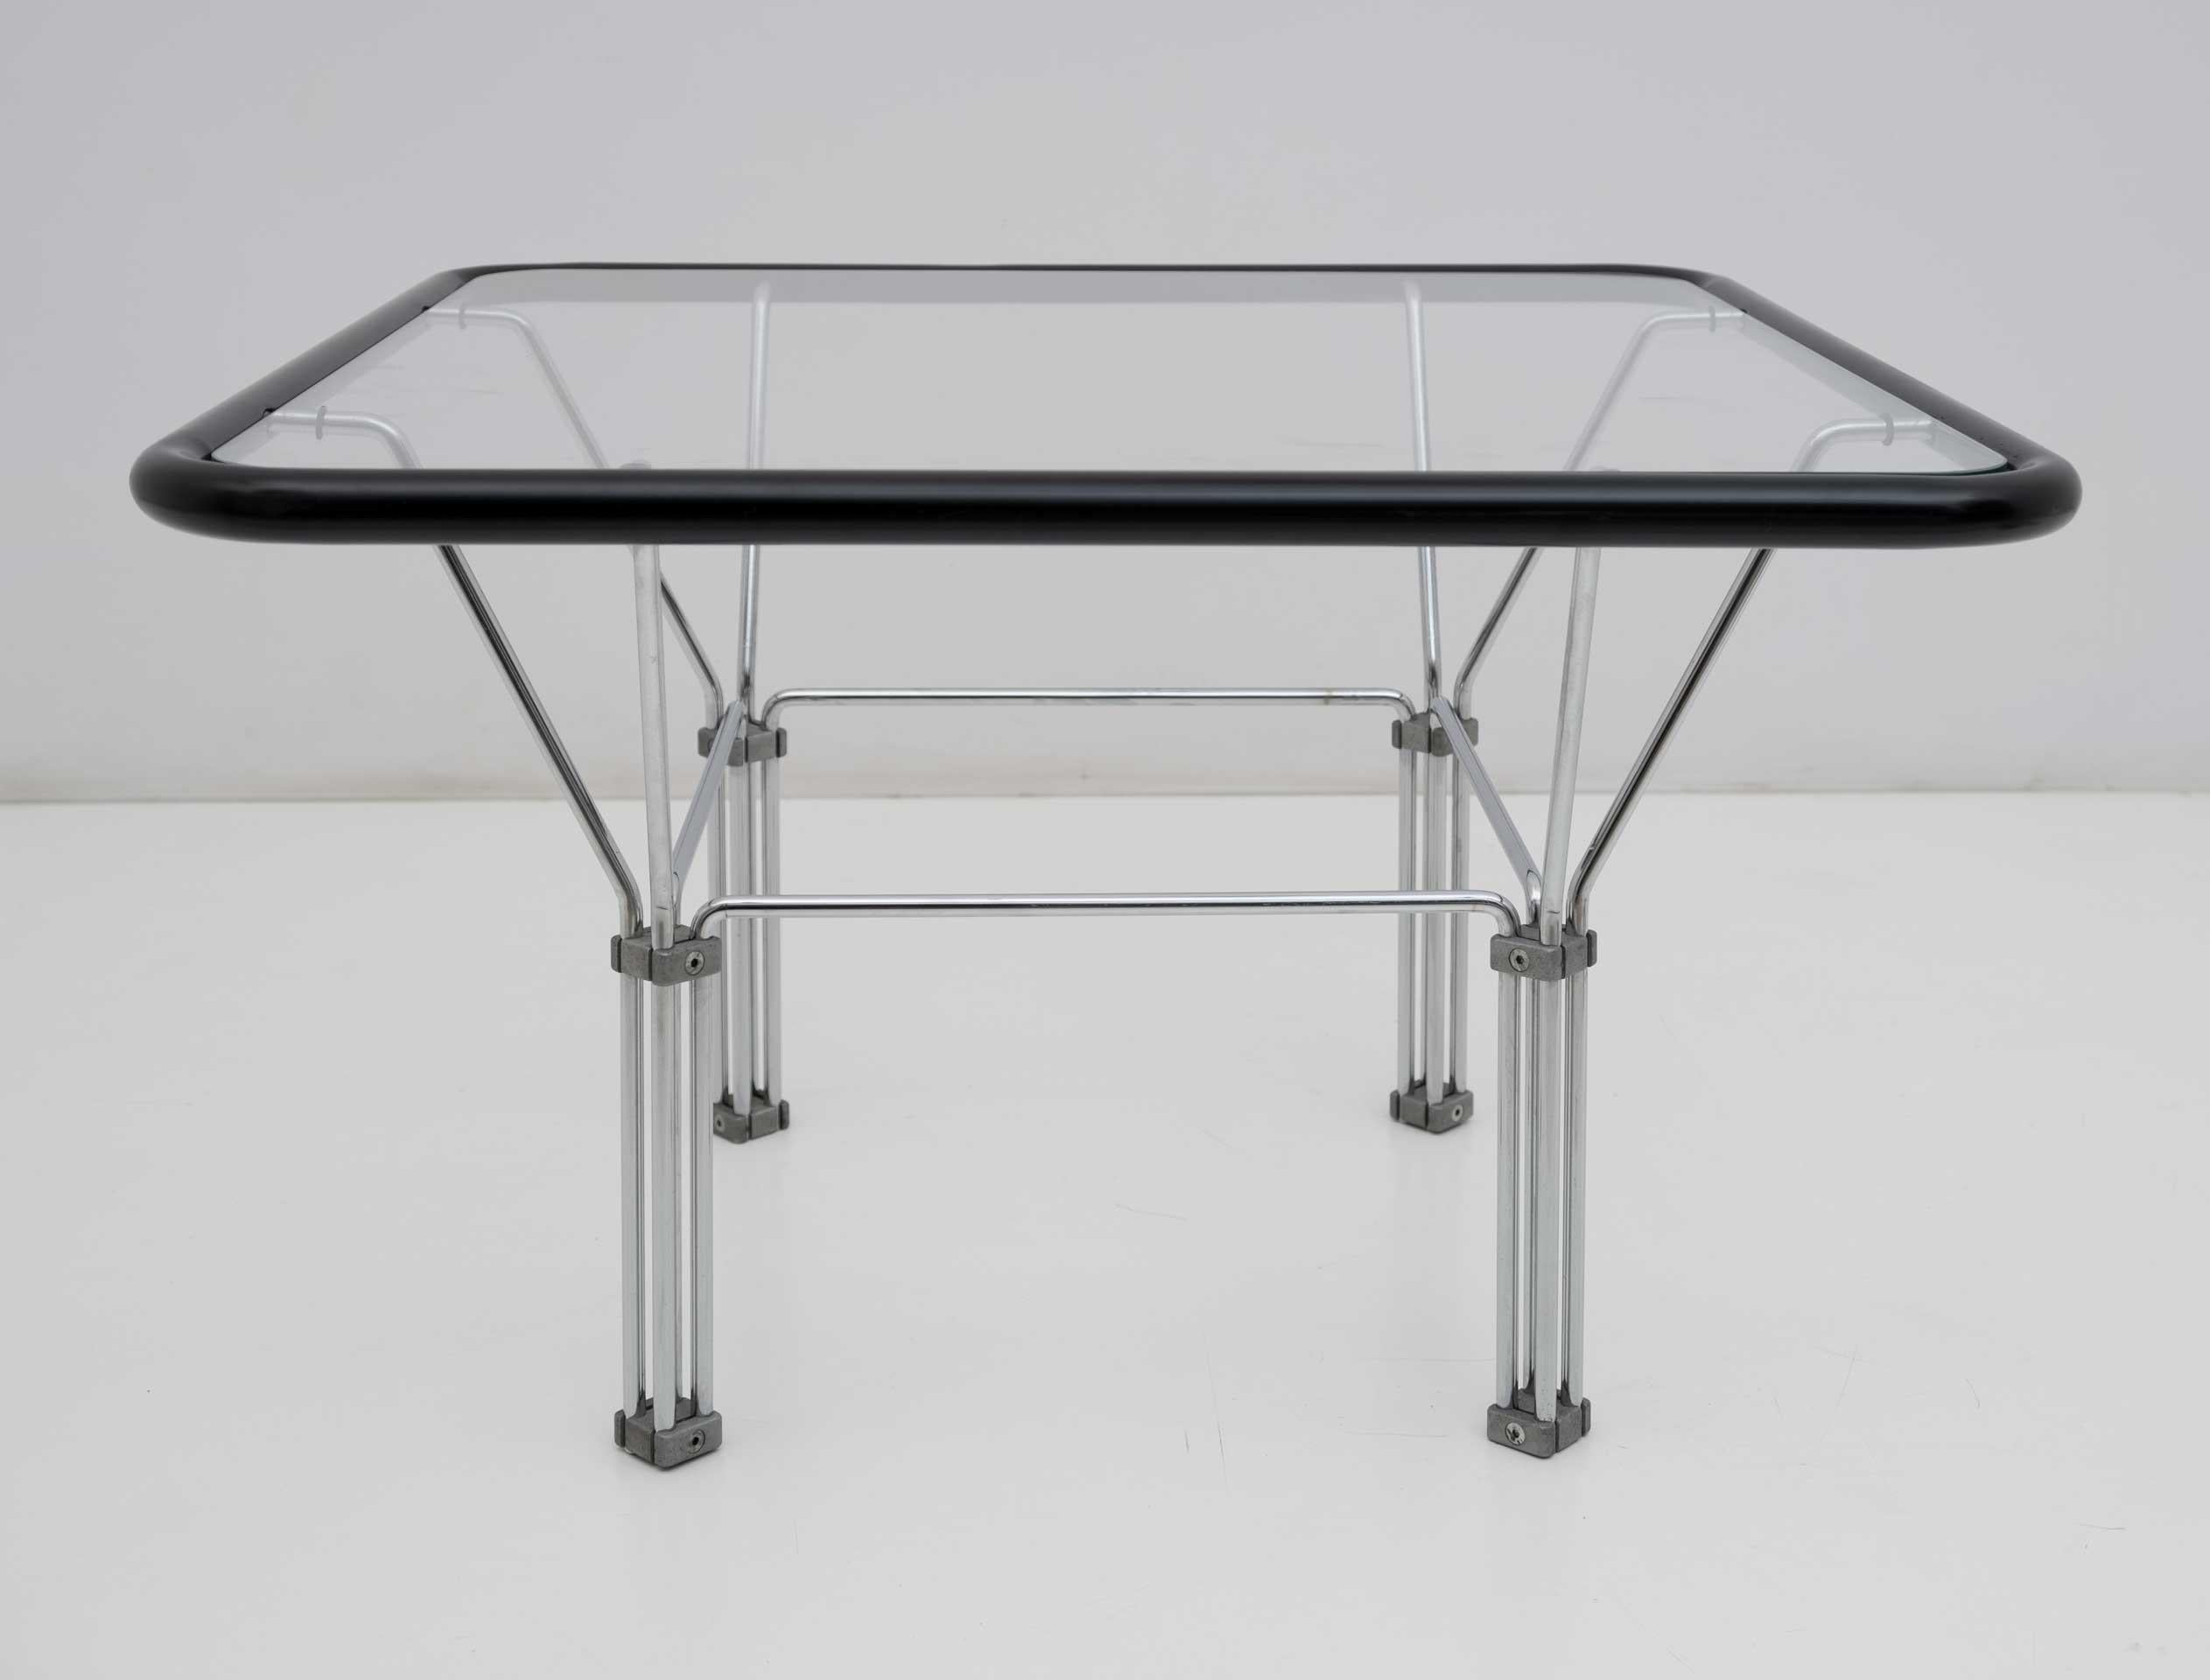 This coffee table is attributed to Danish designer Niels Bendtsen for 